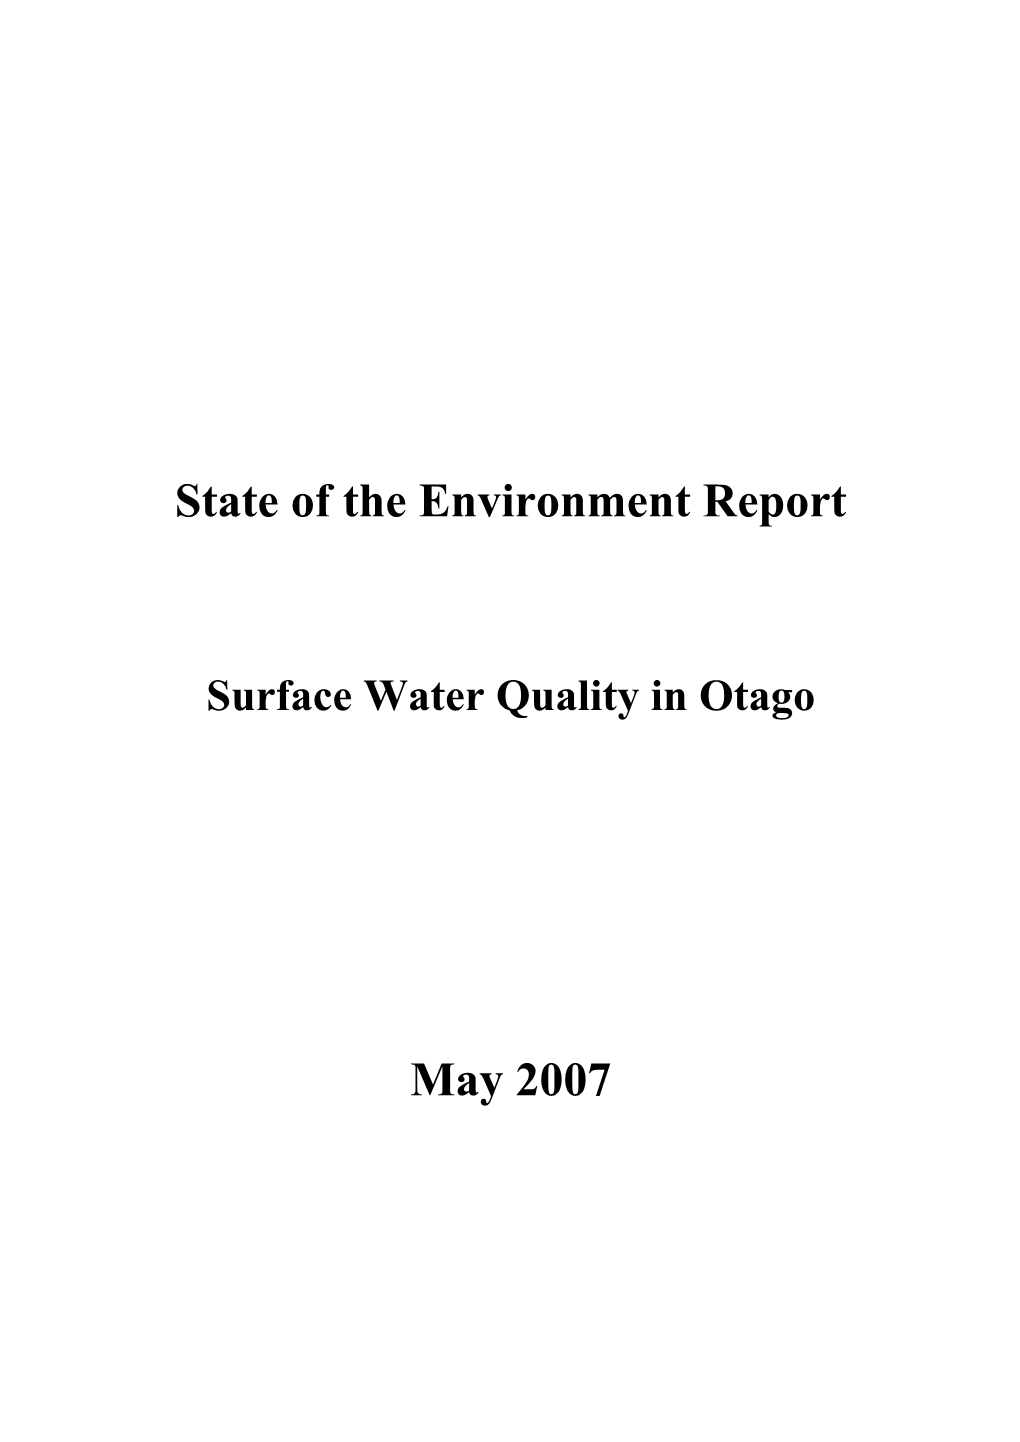 State of the Environment Report May 2007